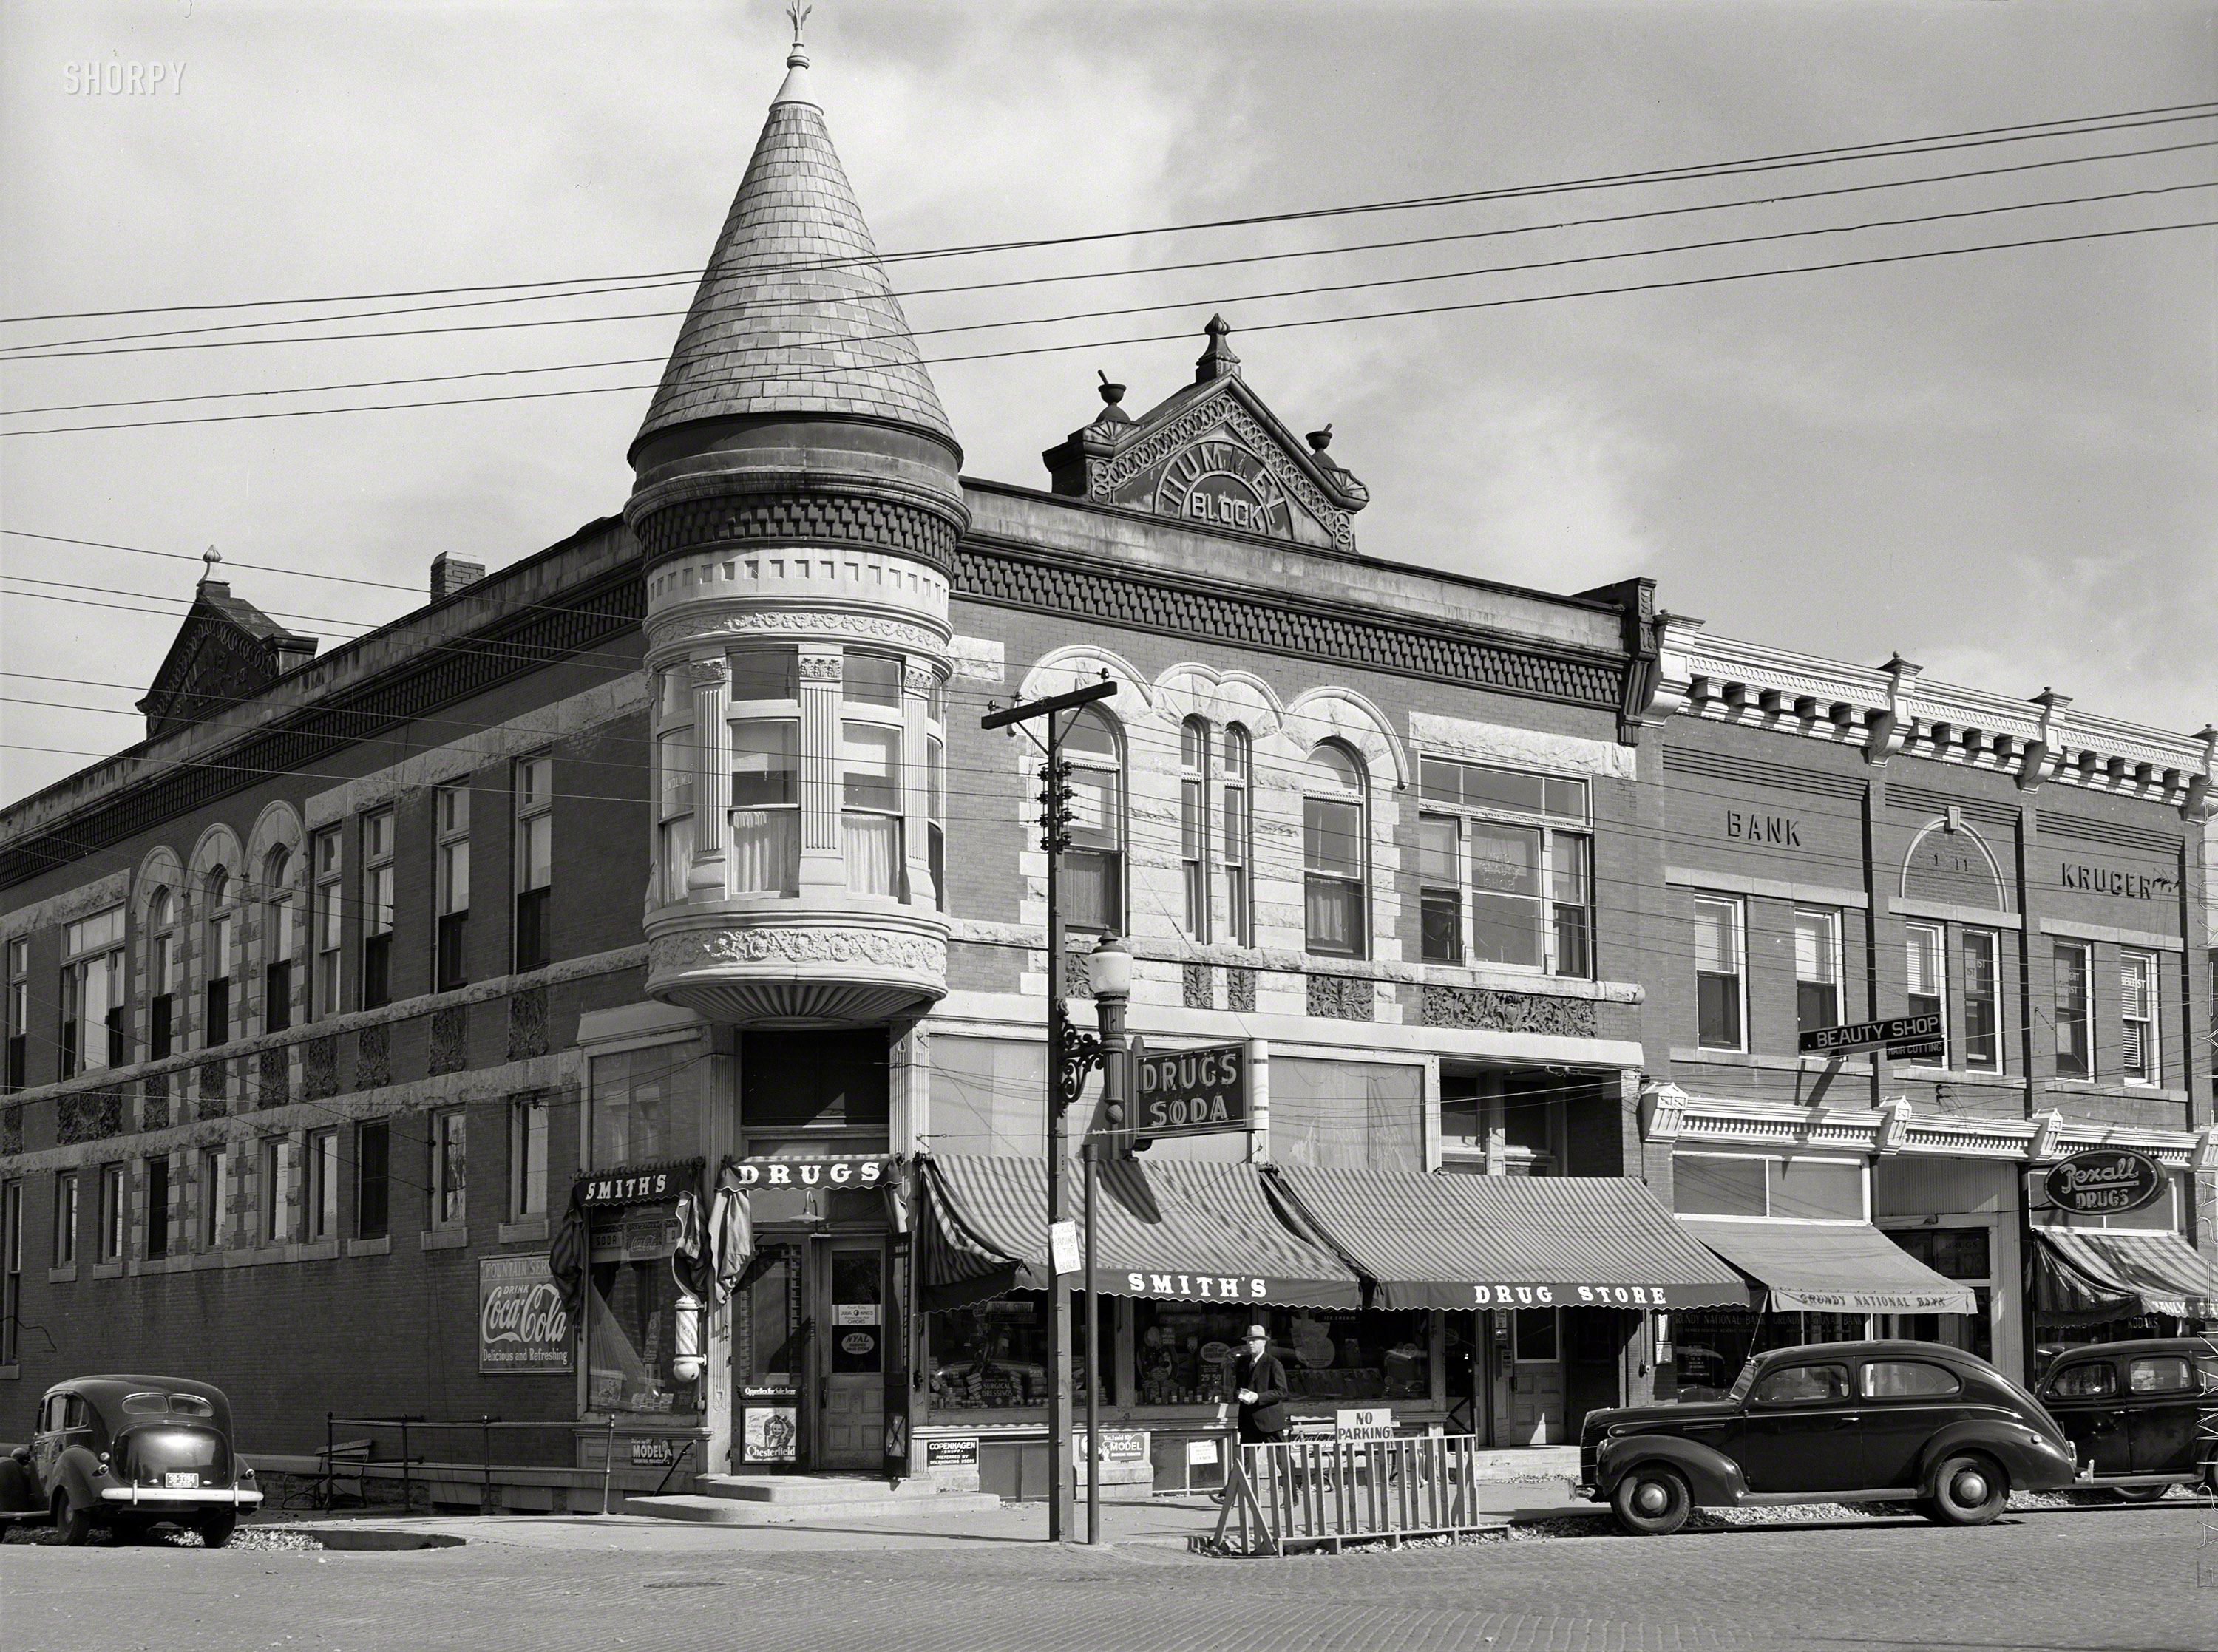 October 1939. "Stores on main street (G Avenue). Grundy Center, Iowa." Photo by Arthur Rothstein for the Farm Security Administration. View full size.